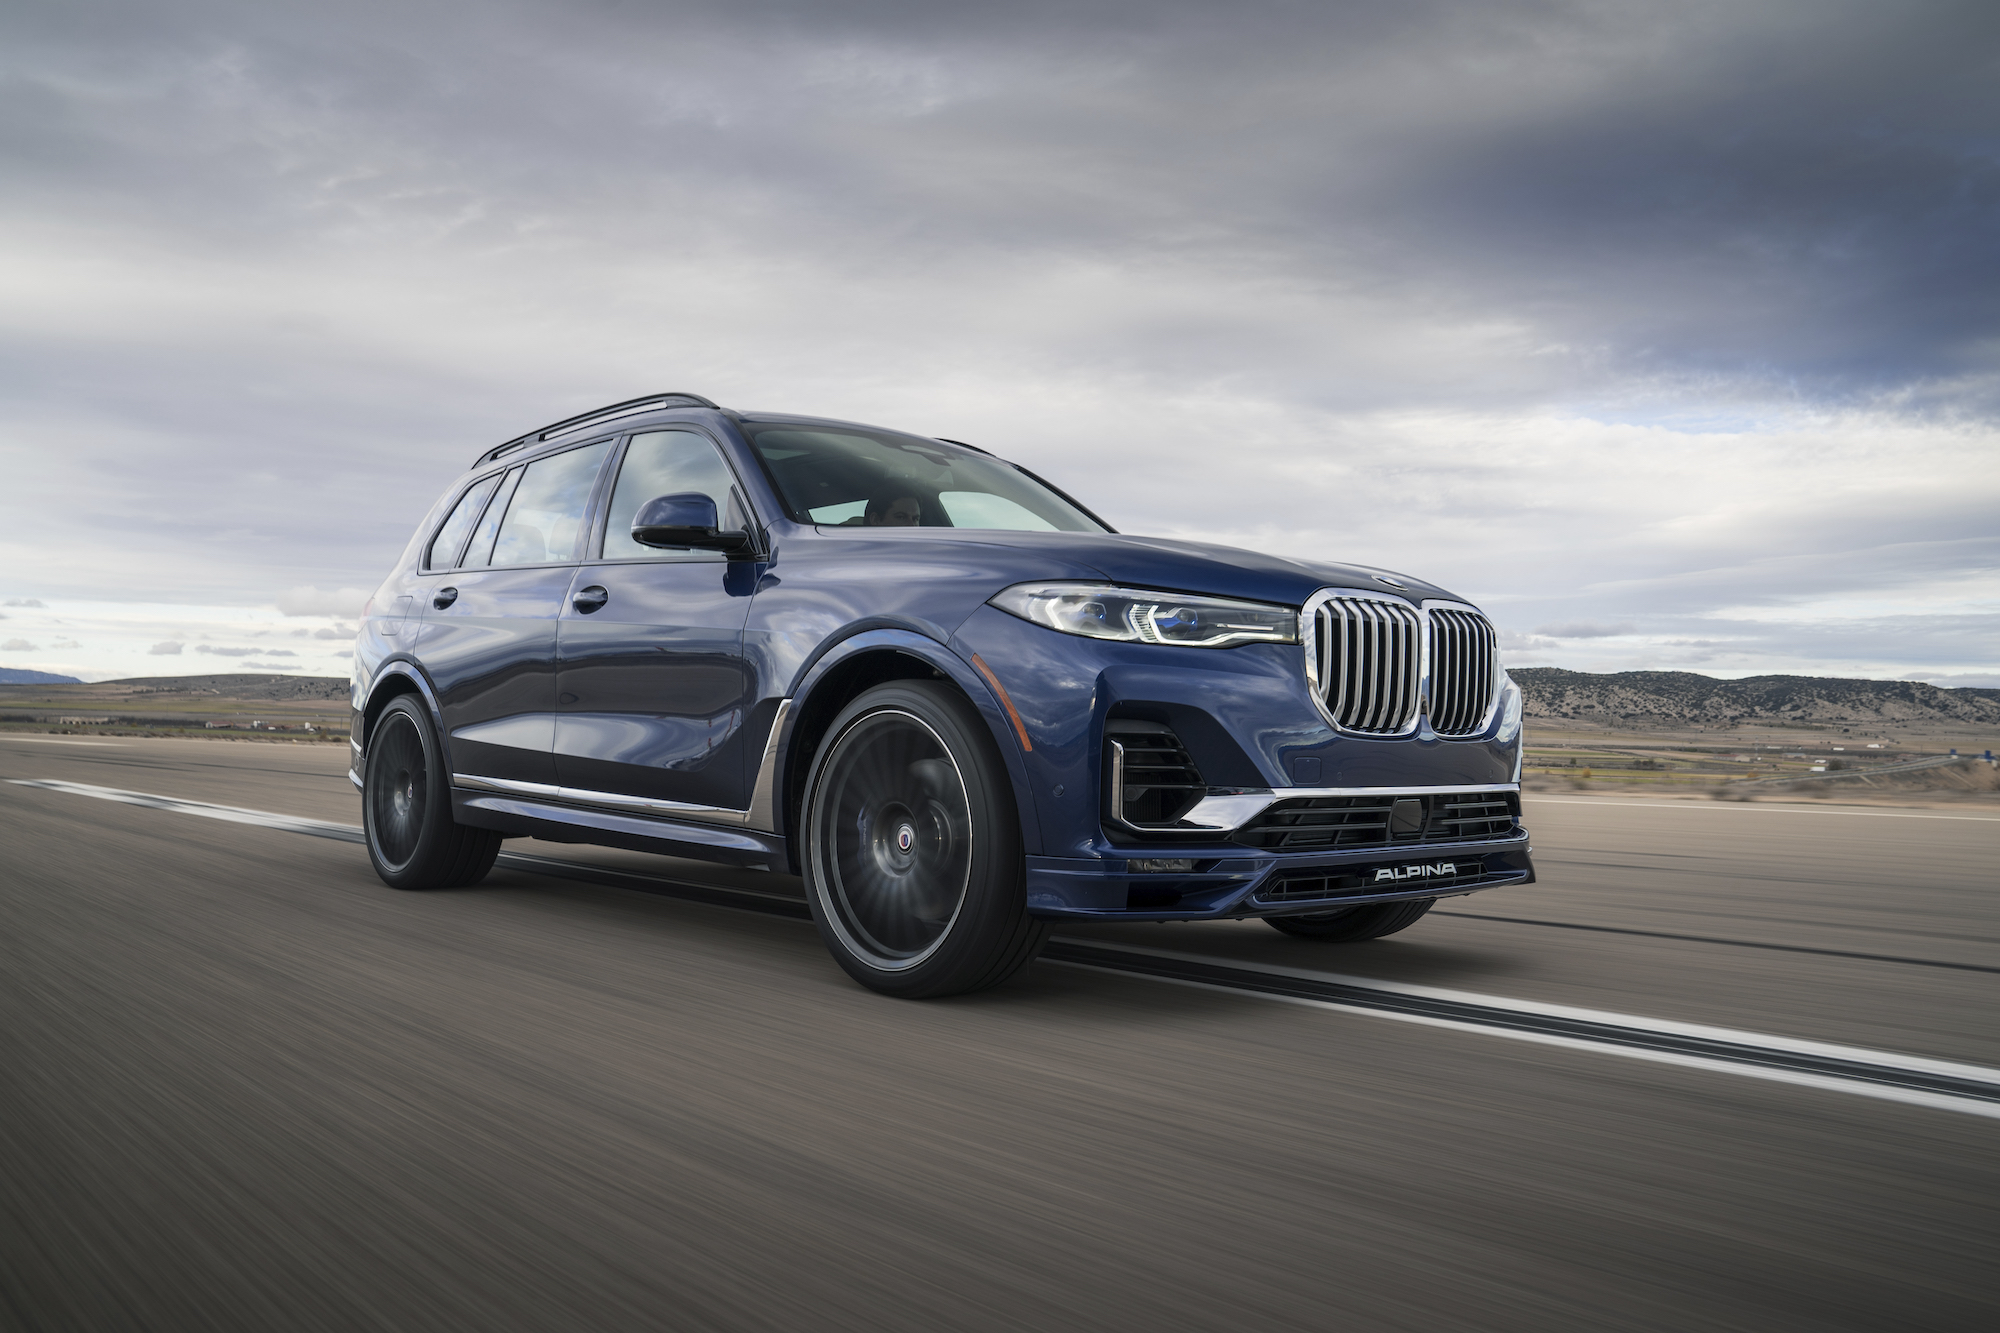 A dark-blue 2021 BMW Alpina XB7 large crossover SUV travels on a strip of asphalt surrounded by grassy hills